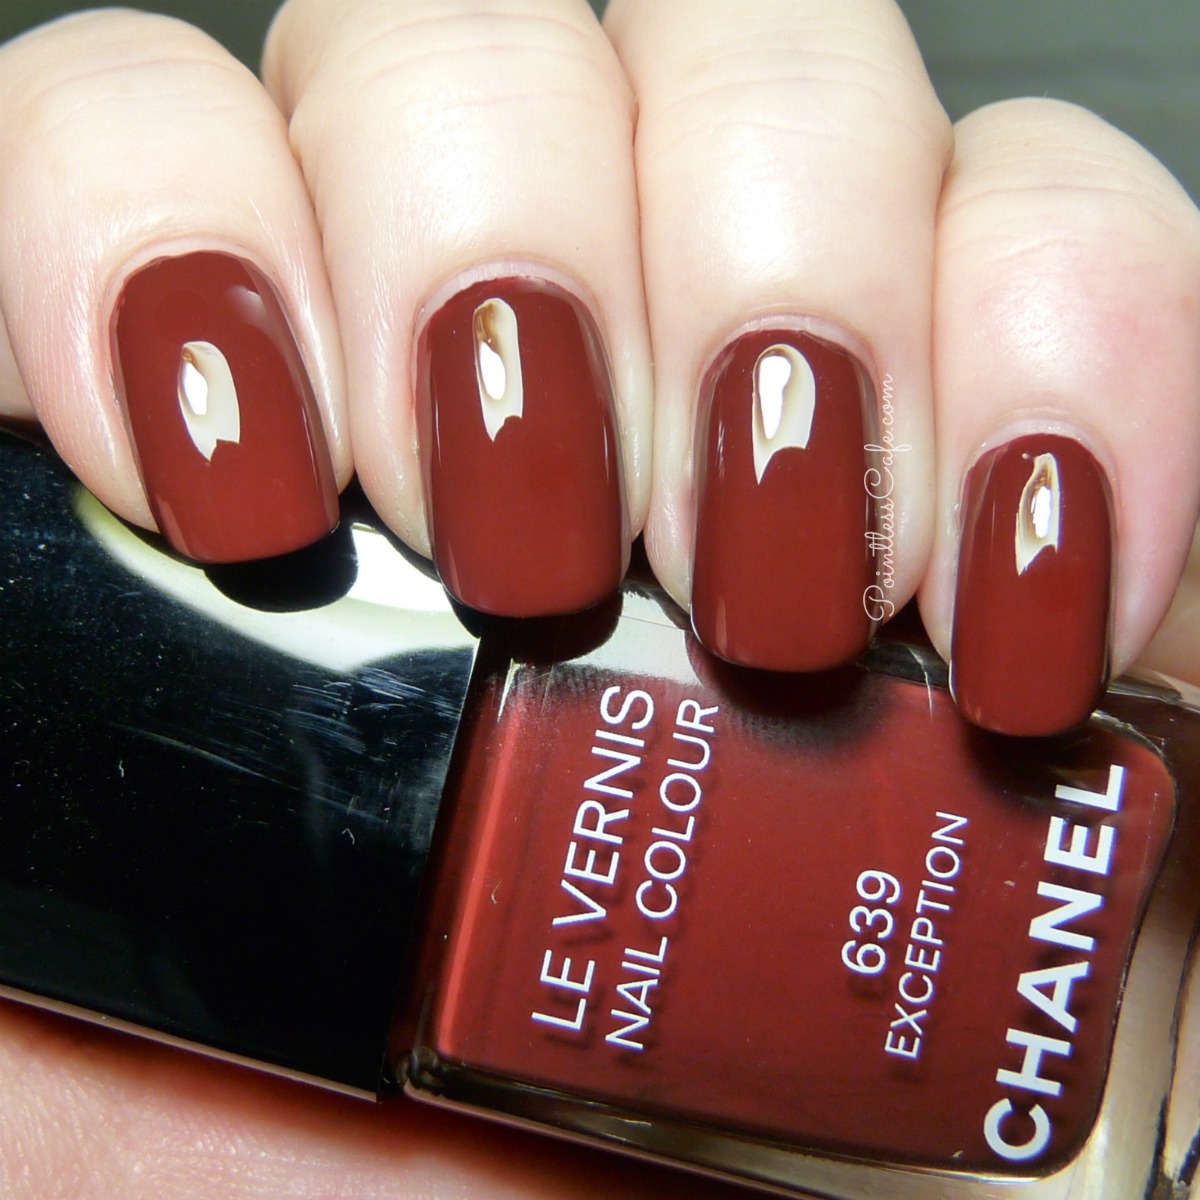 Chanel Exception: Swatches and Review - More Marsala!